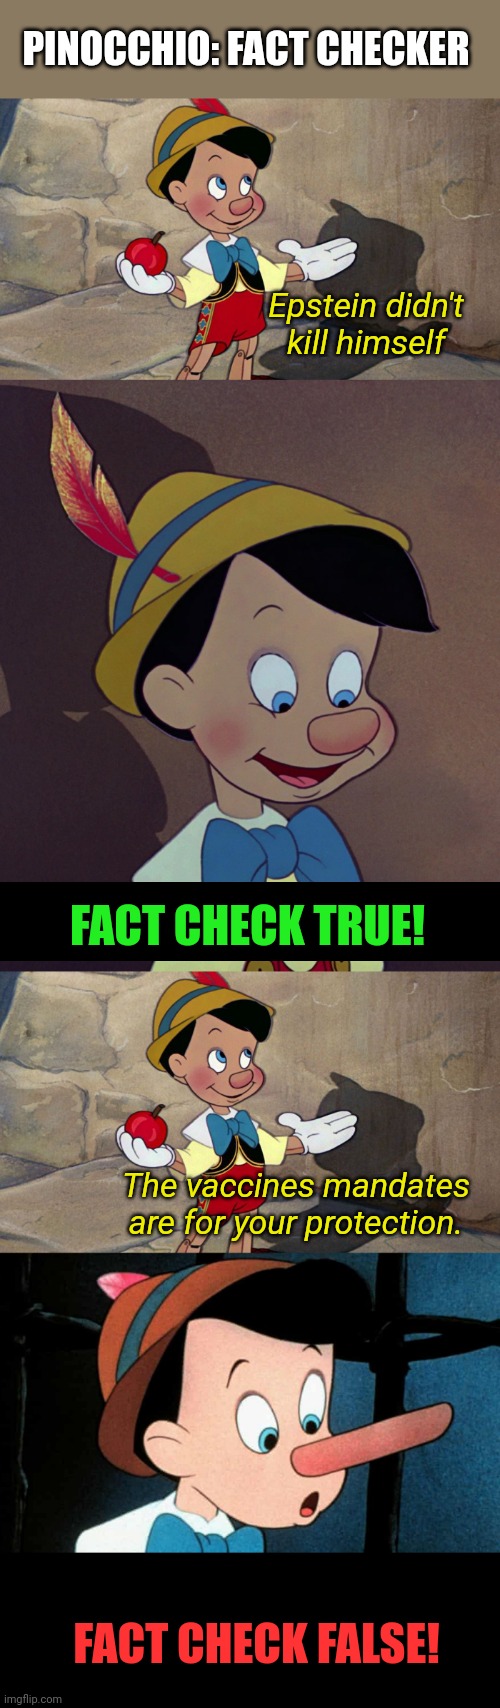 Fact Checkers |  PINOCCHIO: FACT CHECKER; Epstein didn't kill himself; FACT CHECK TRUE! The vaccines mandates are for your protection. FACT CHECK FALSE! | image tagged in fact check,and thats a fact,pinocchio | made w/ Imgflip meme maker